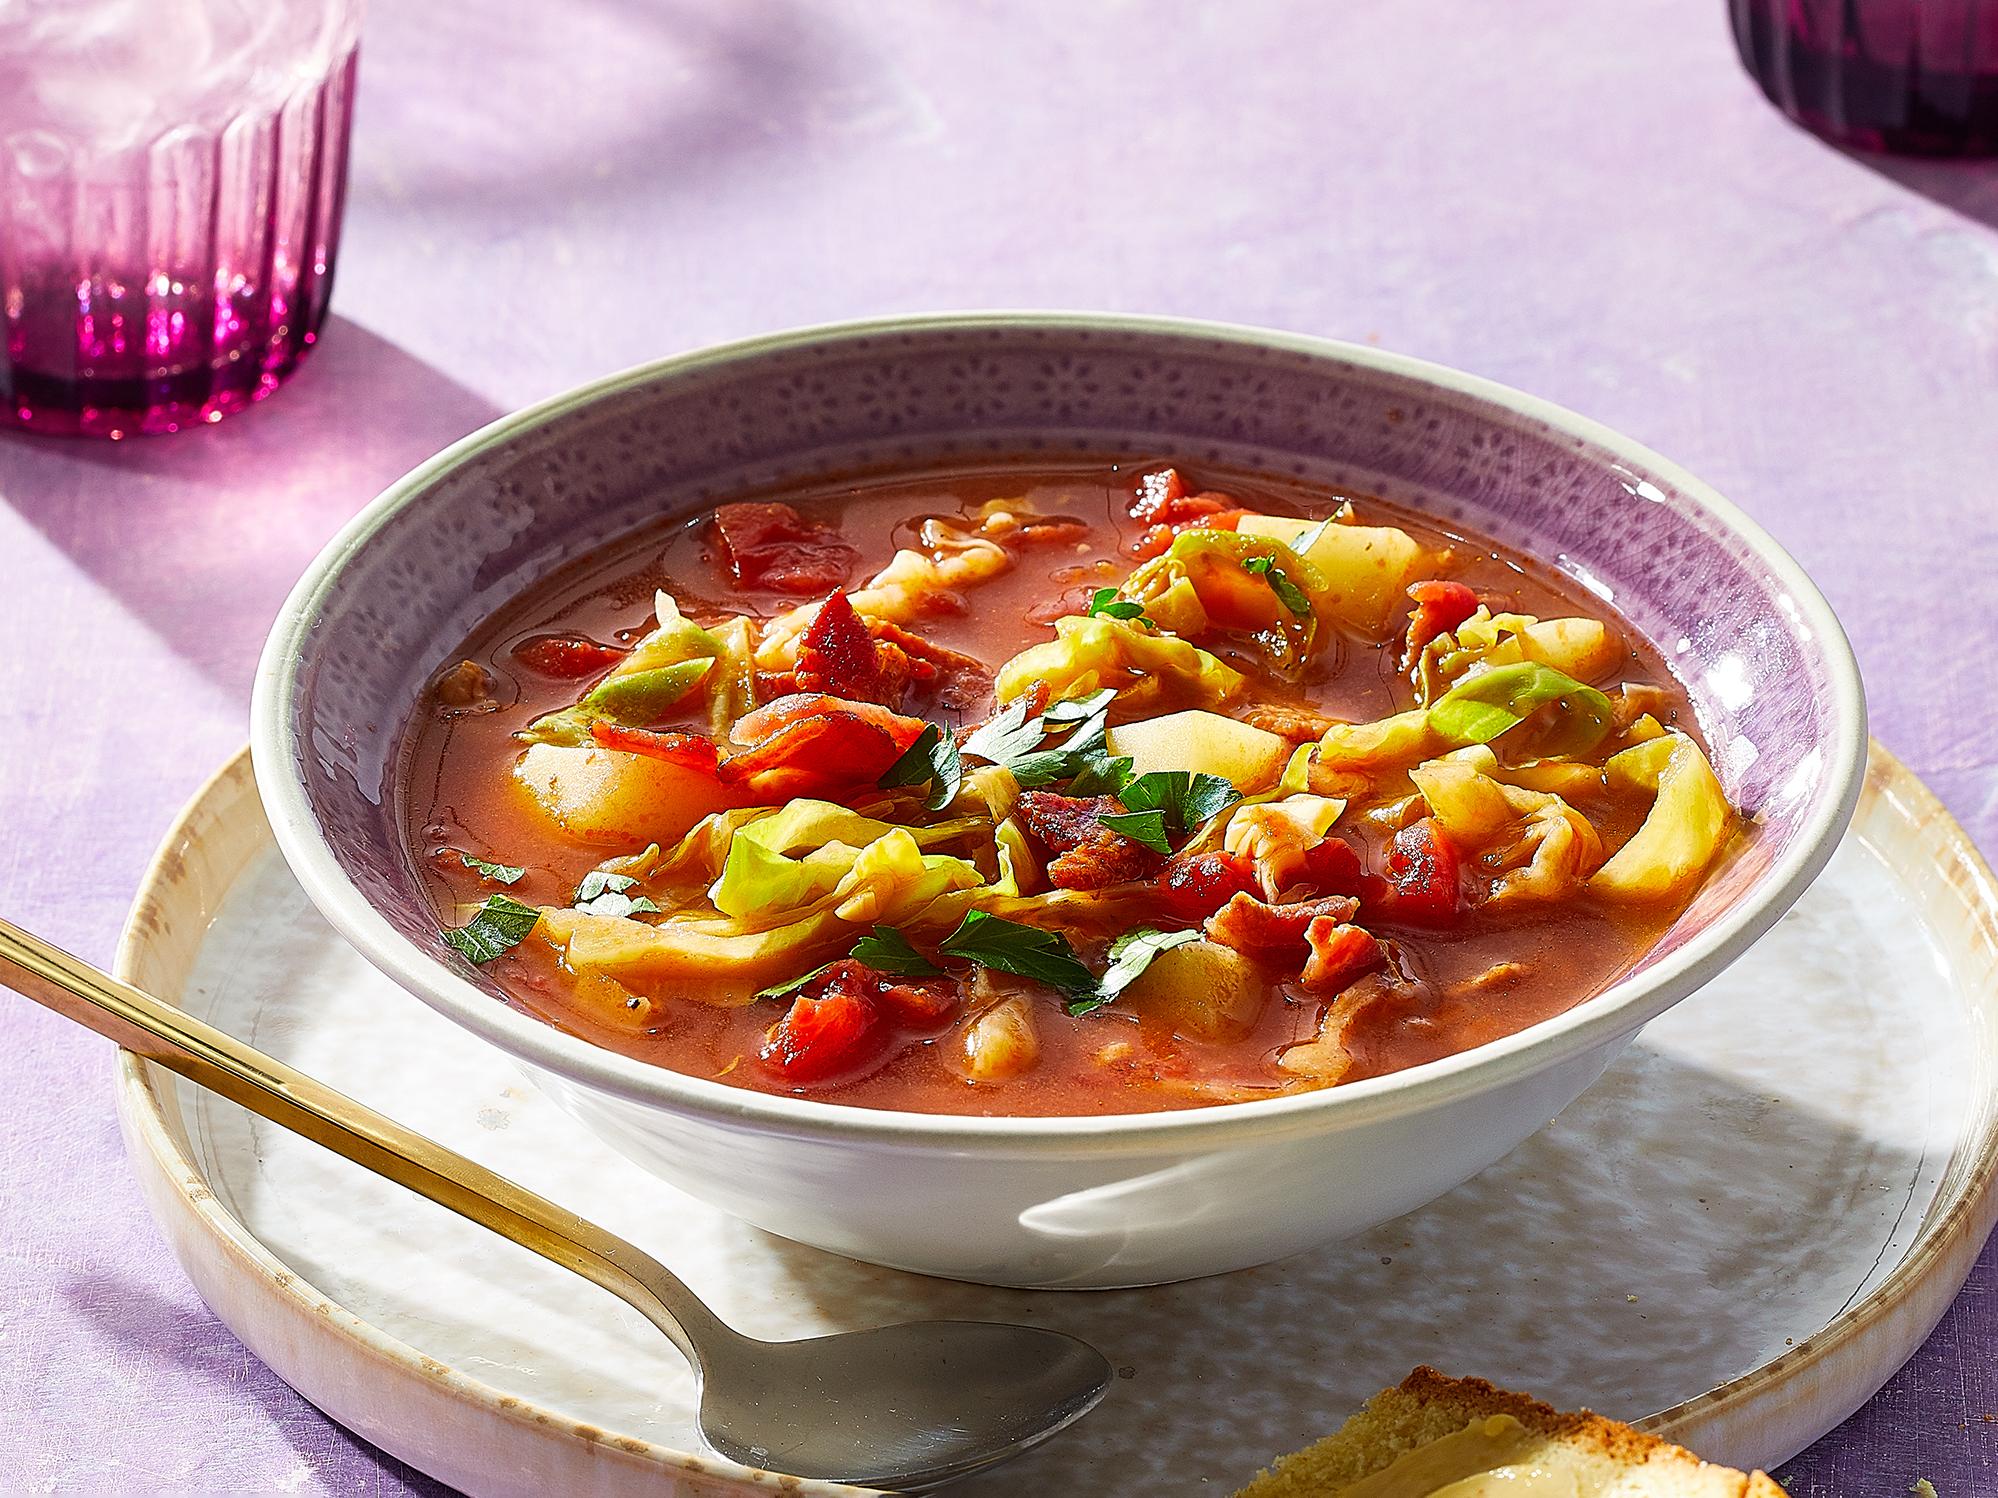  A cozy and comforting bowl of Irish-Italian soup